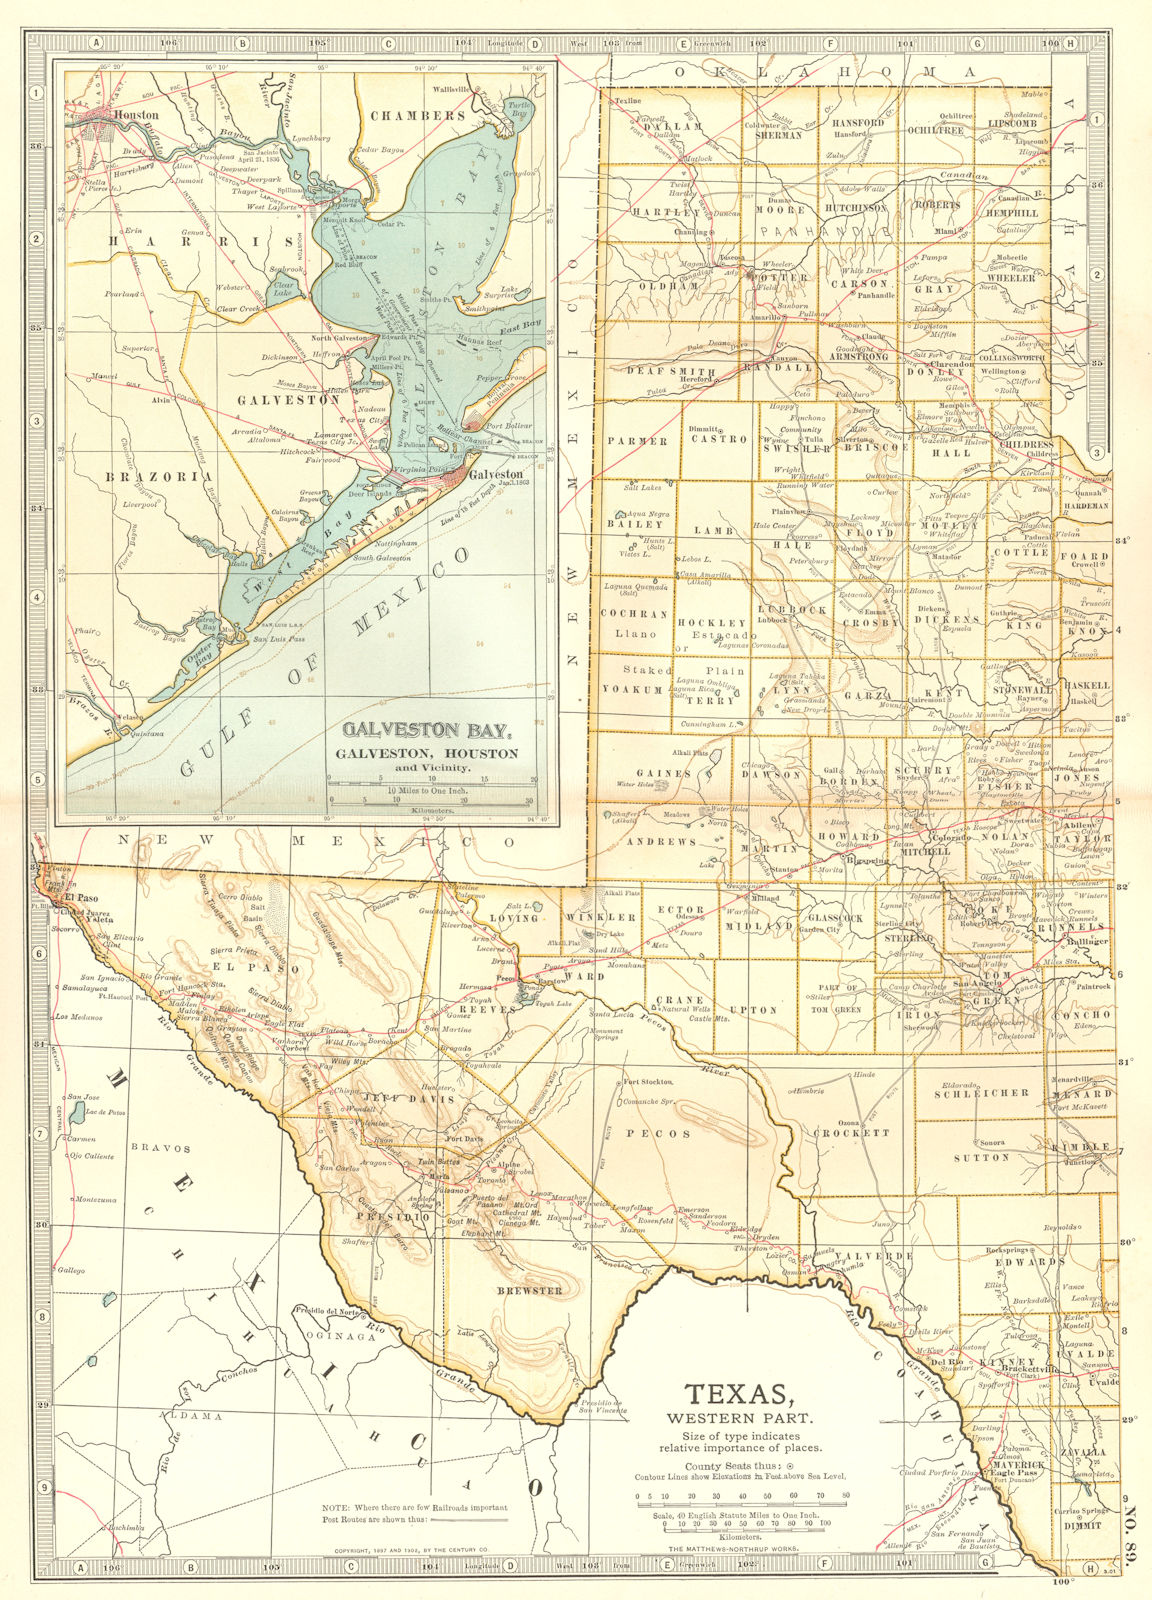 TEXAS WEST. State map showing counties. Inset Galveston Bay, Houston 1903